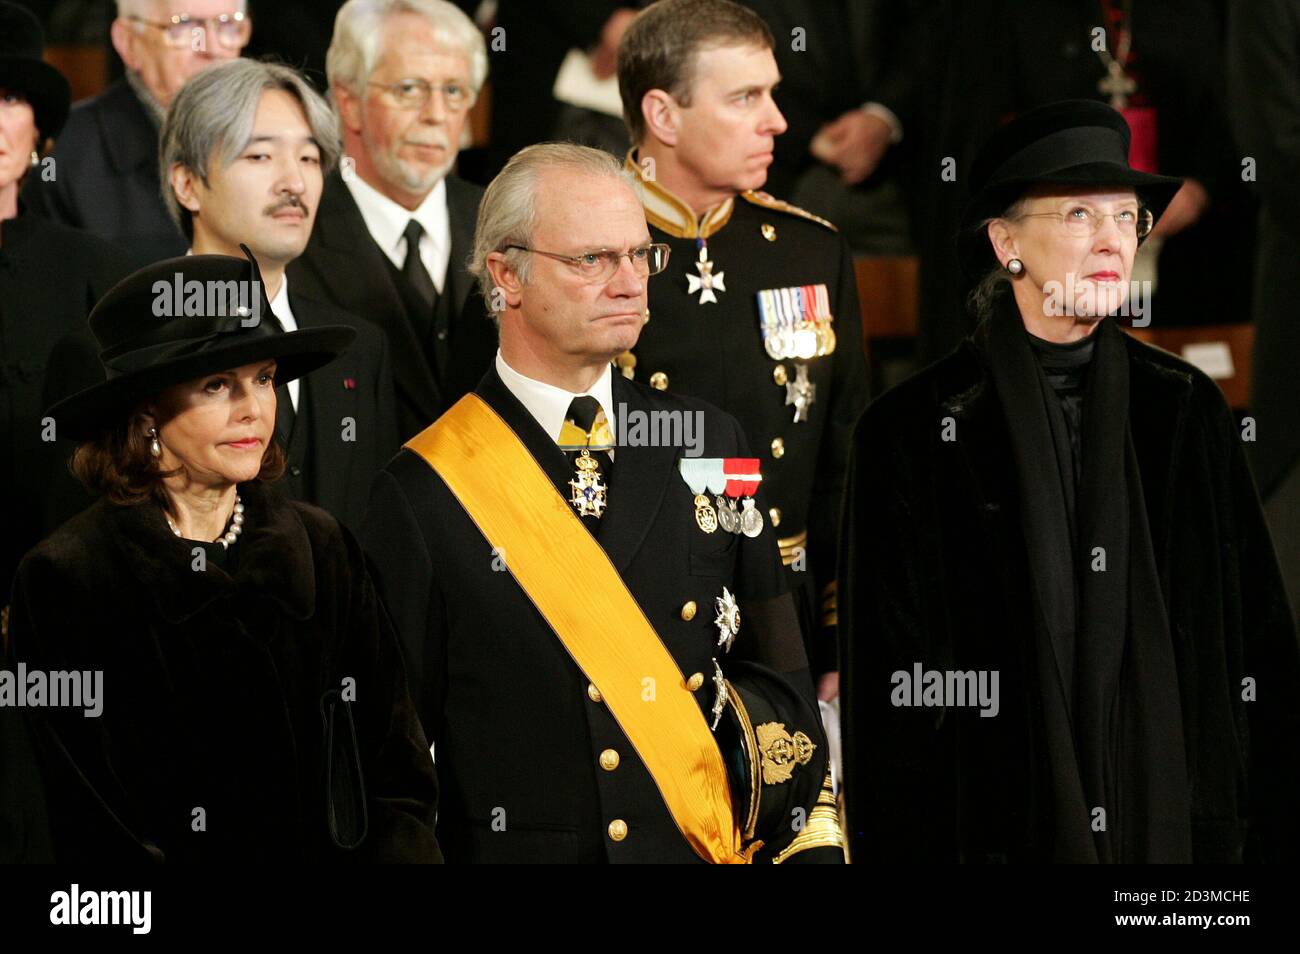 spids automatisk sporadisk L toR 1st row) Swedish Queen Silvia and King Carl Gustaf and Denmark's  Queen Margrethe II, (LtoR 2nd row) Prince Akishino of Japan and Duke of  York attend the state funeral of